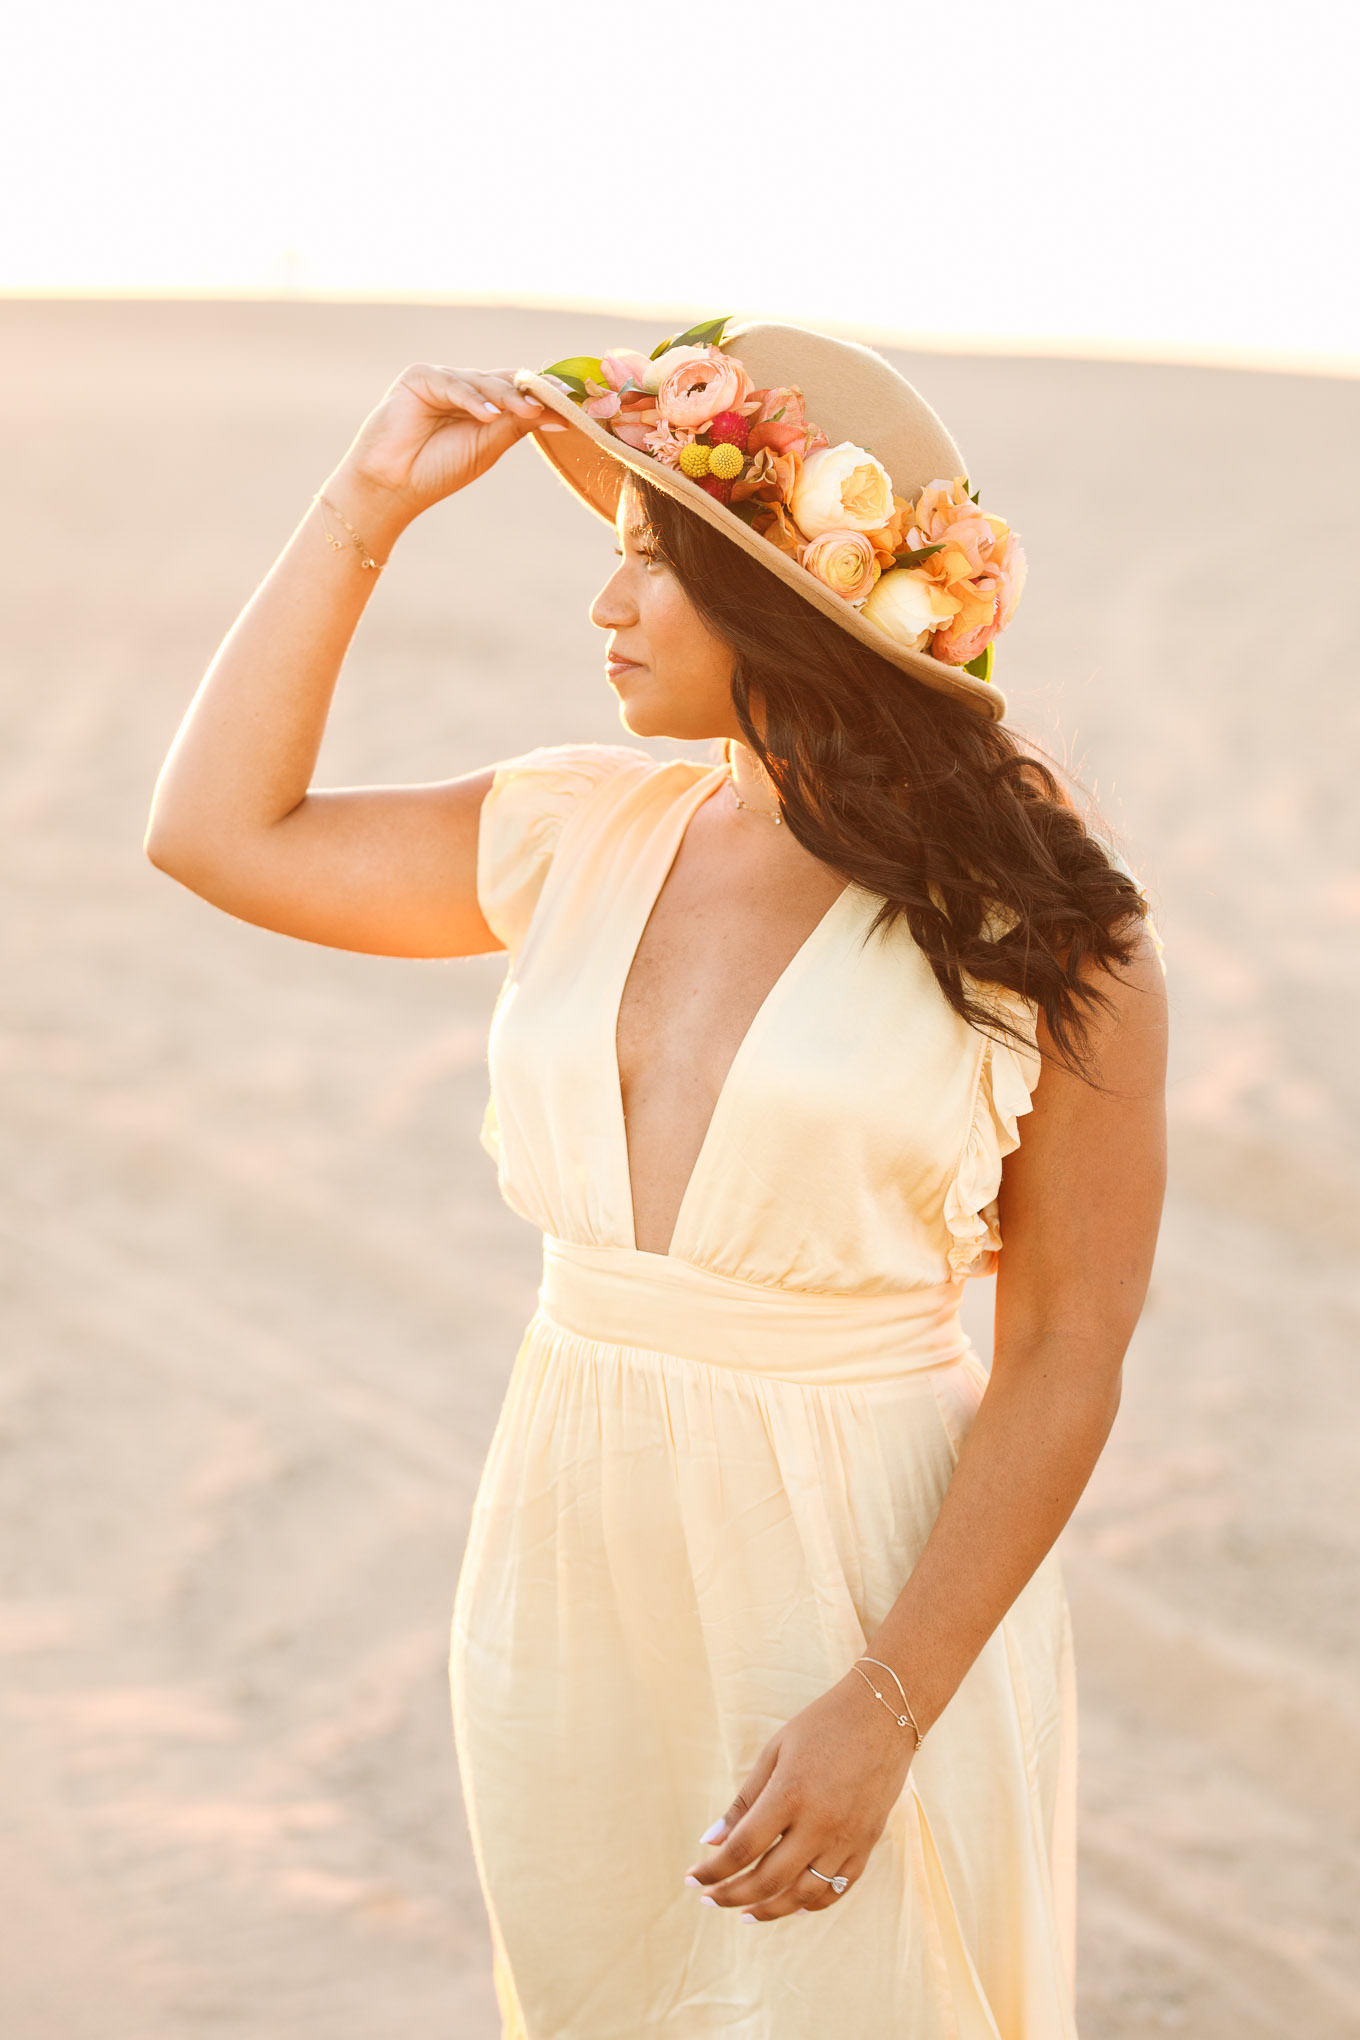 Portrait of a bride to be wearing sunhat with flowers | California Sand Dunes engagement session | Colorful Palm Springs wedding photography | #palmspringsphotographer #sanddunes #engagementsession #southerncalifornia  Source: Mary Costa Photography | Los Angeles